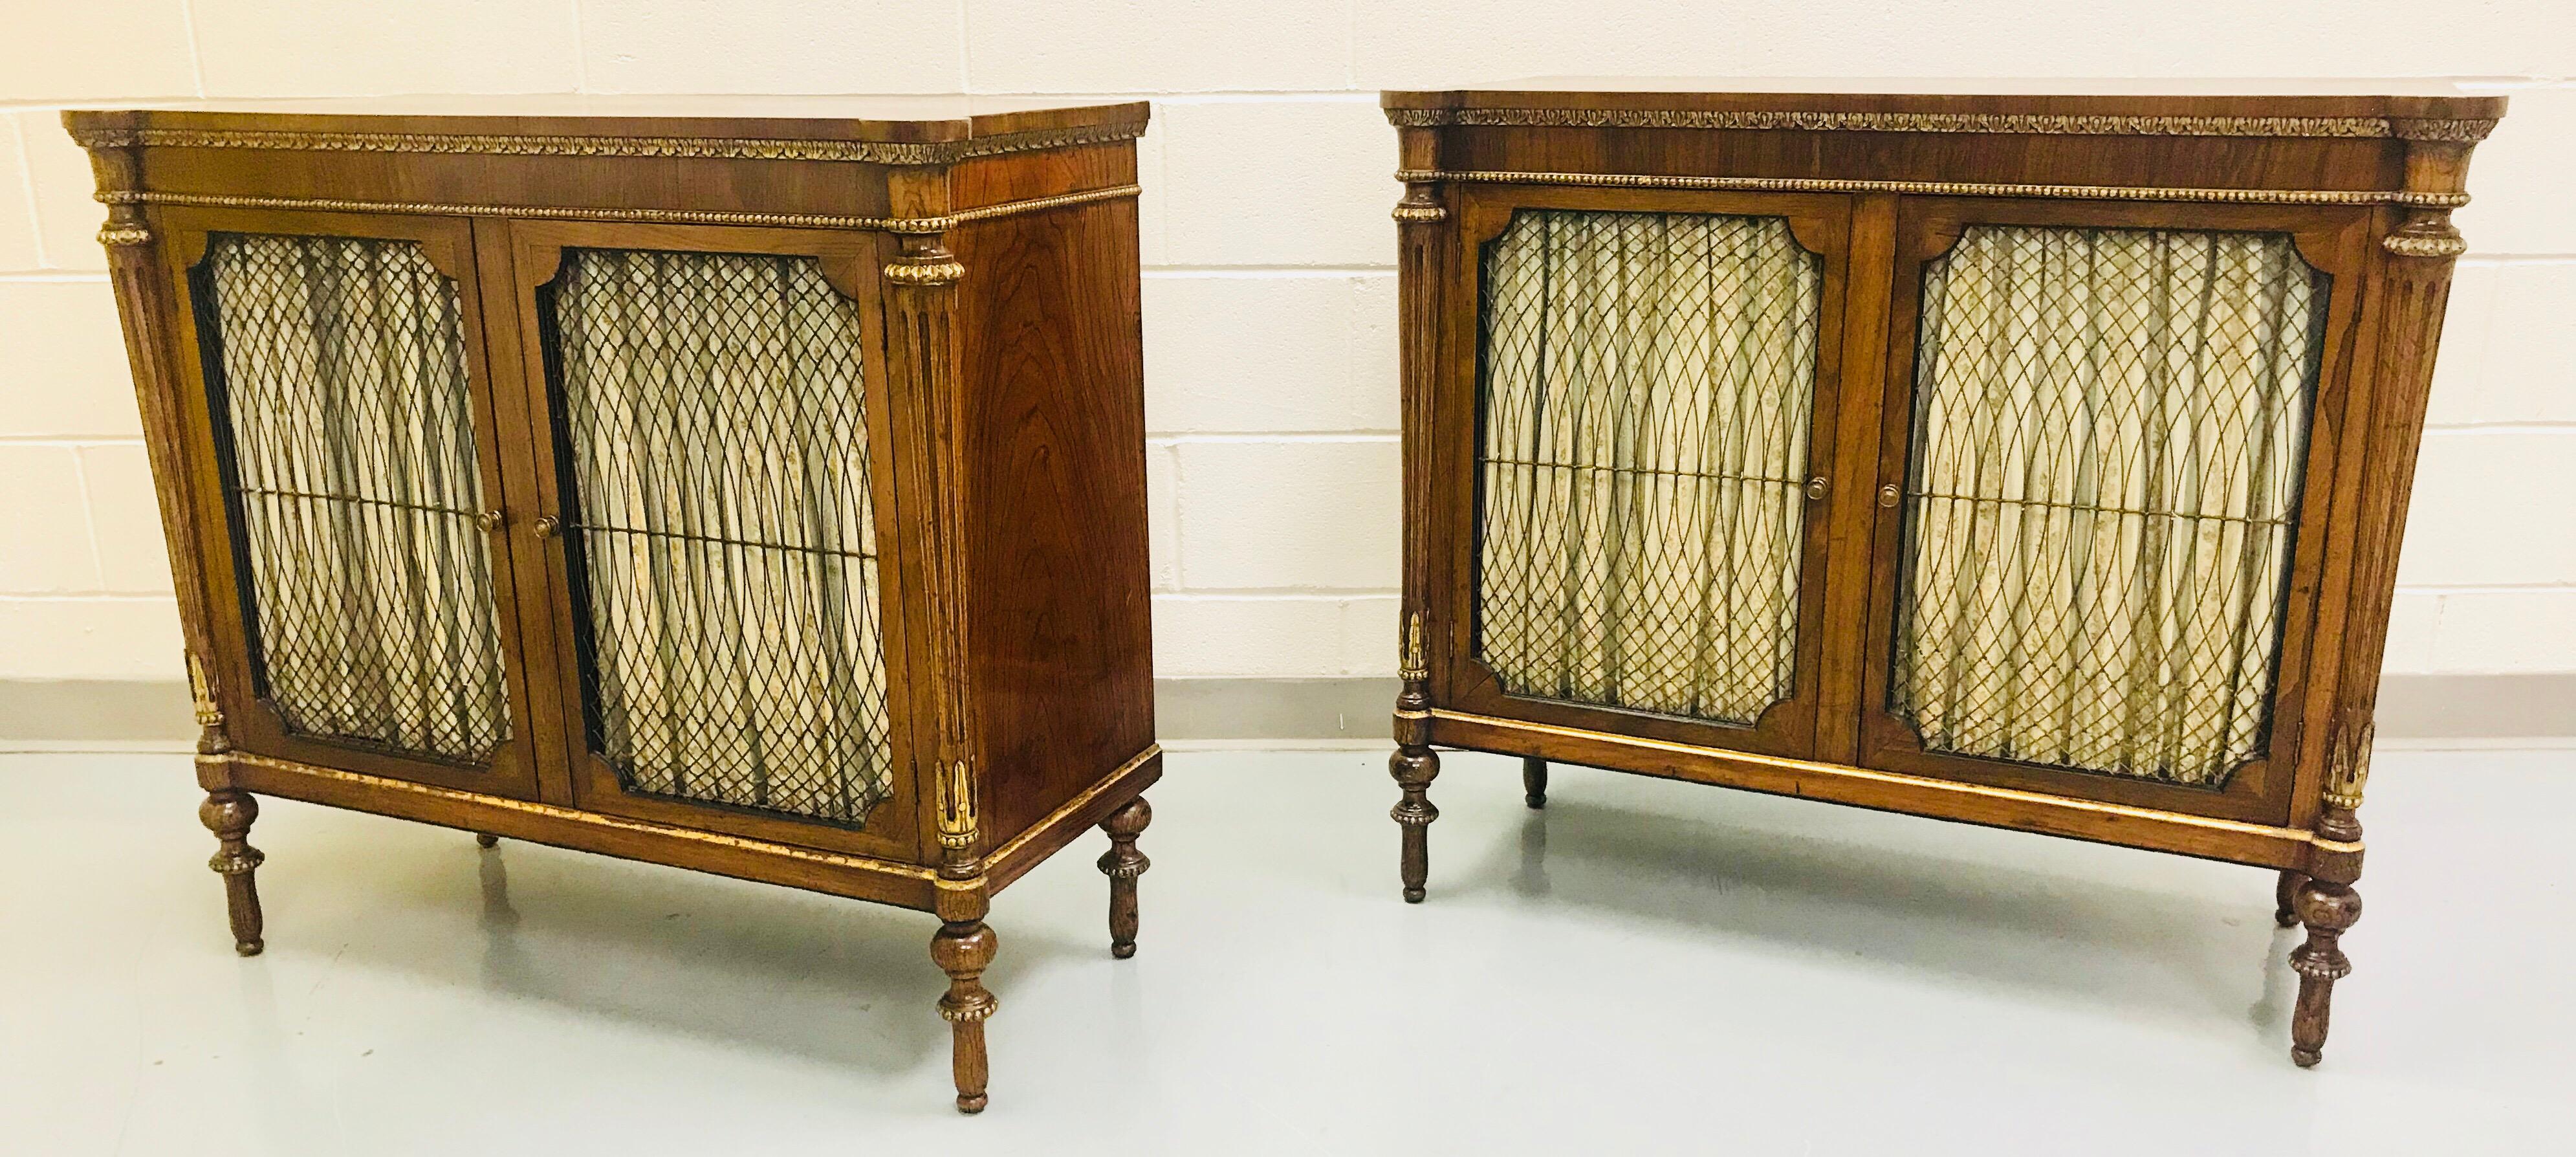 Pair of English Regency Style Rosewood and Parcel-Gilt Cabinets For Sale 13